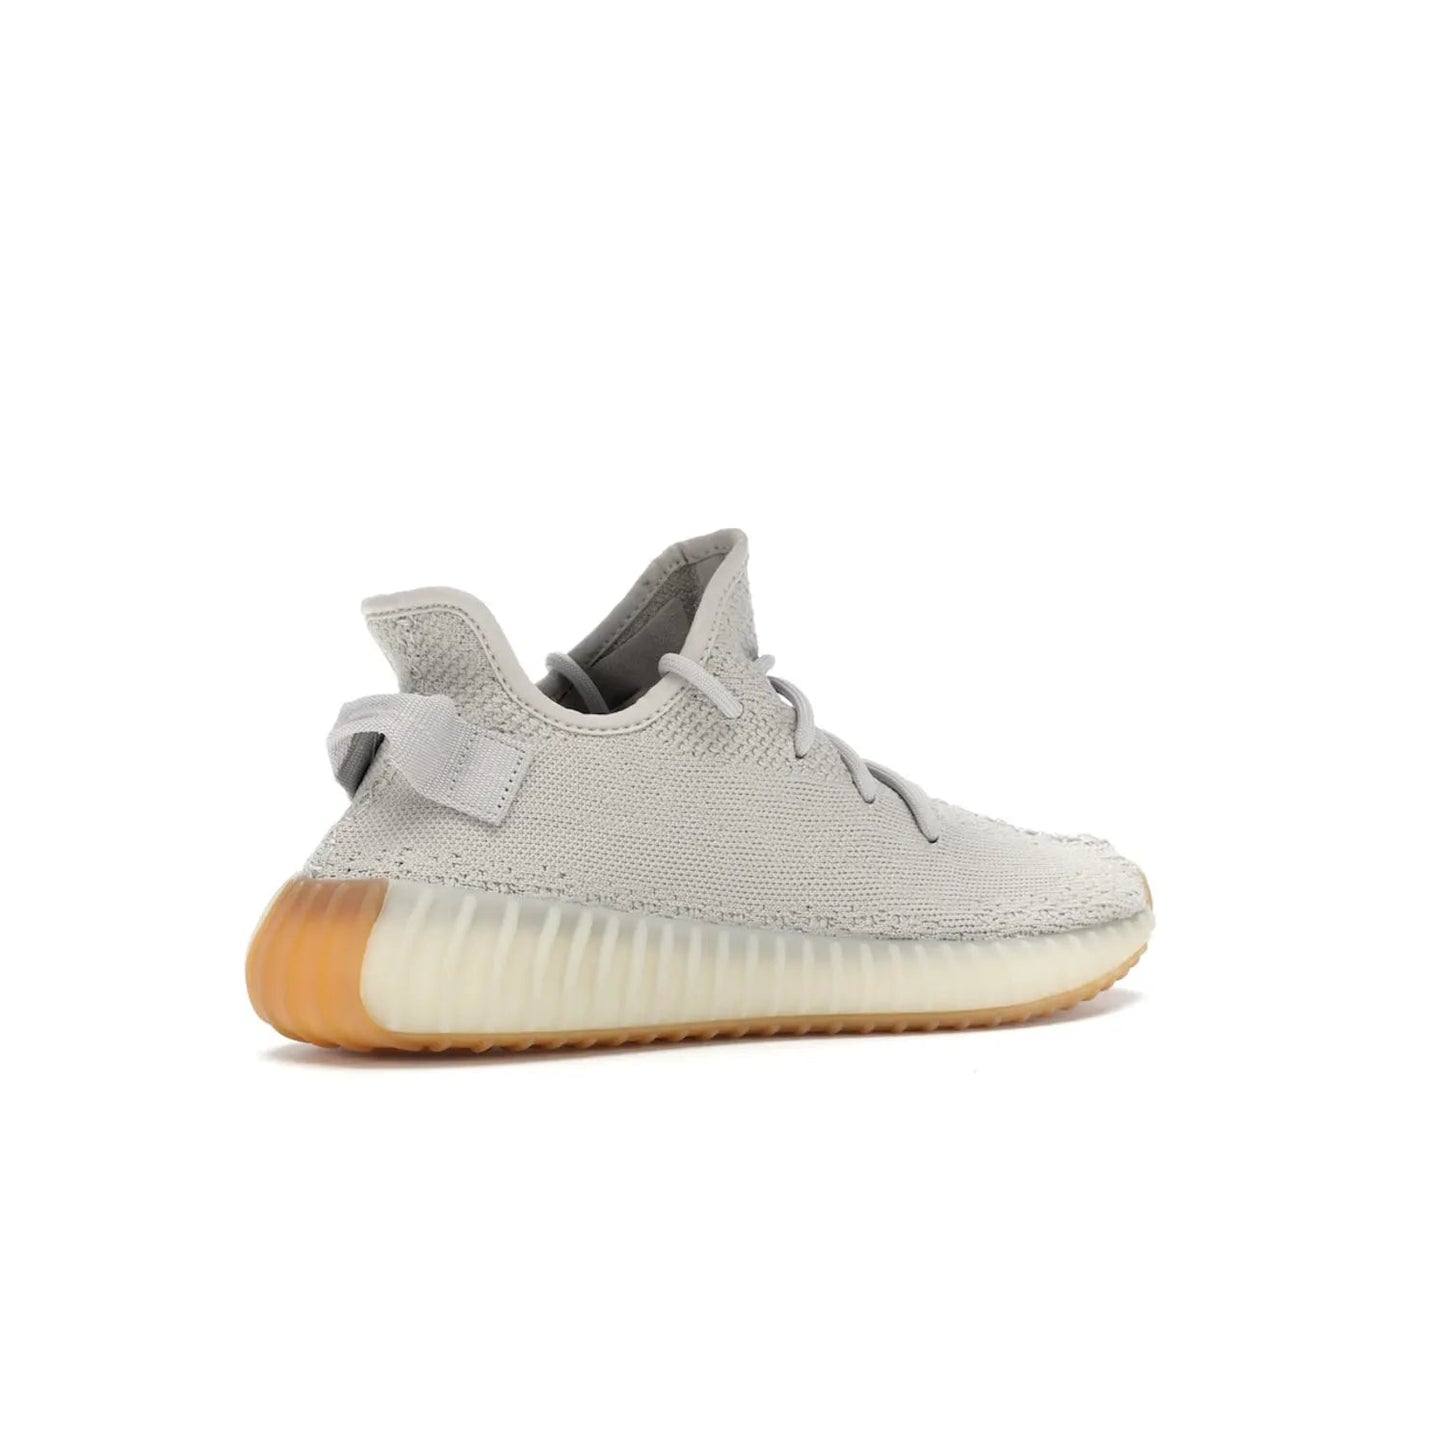 adidas Yeezy Boost 350 V2 Sesame - Image 34 - Only at www.BallersClubKickz.com - Introducing the adidas Yeezy Boost 350 V2 Sesame. Featuring a sesame upper, midsole and gum sole for a sleek silhouette. Cop the stylish sneaker released in November 2018.